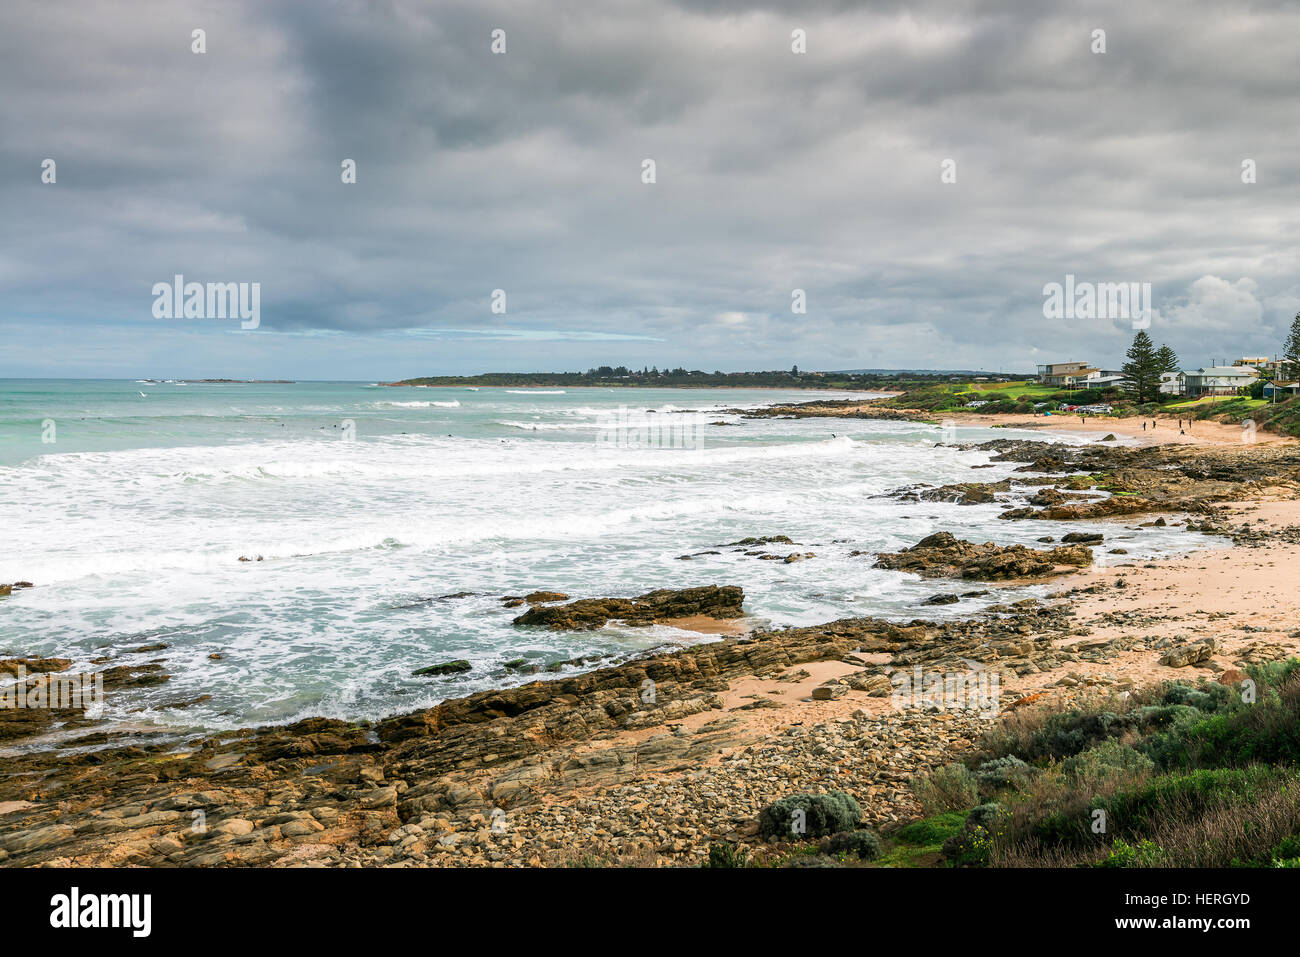 Picturesque view at Surfers beach at  Middleton, South Australia Stock Photo